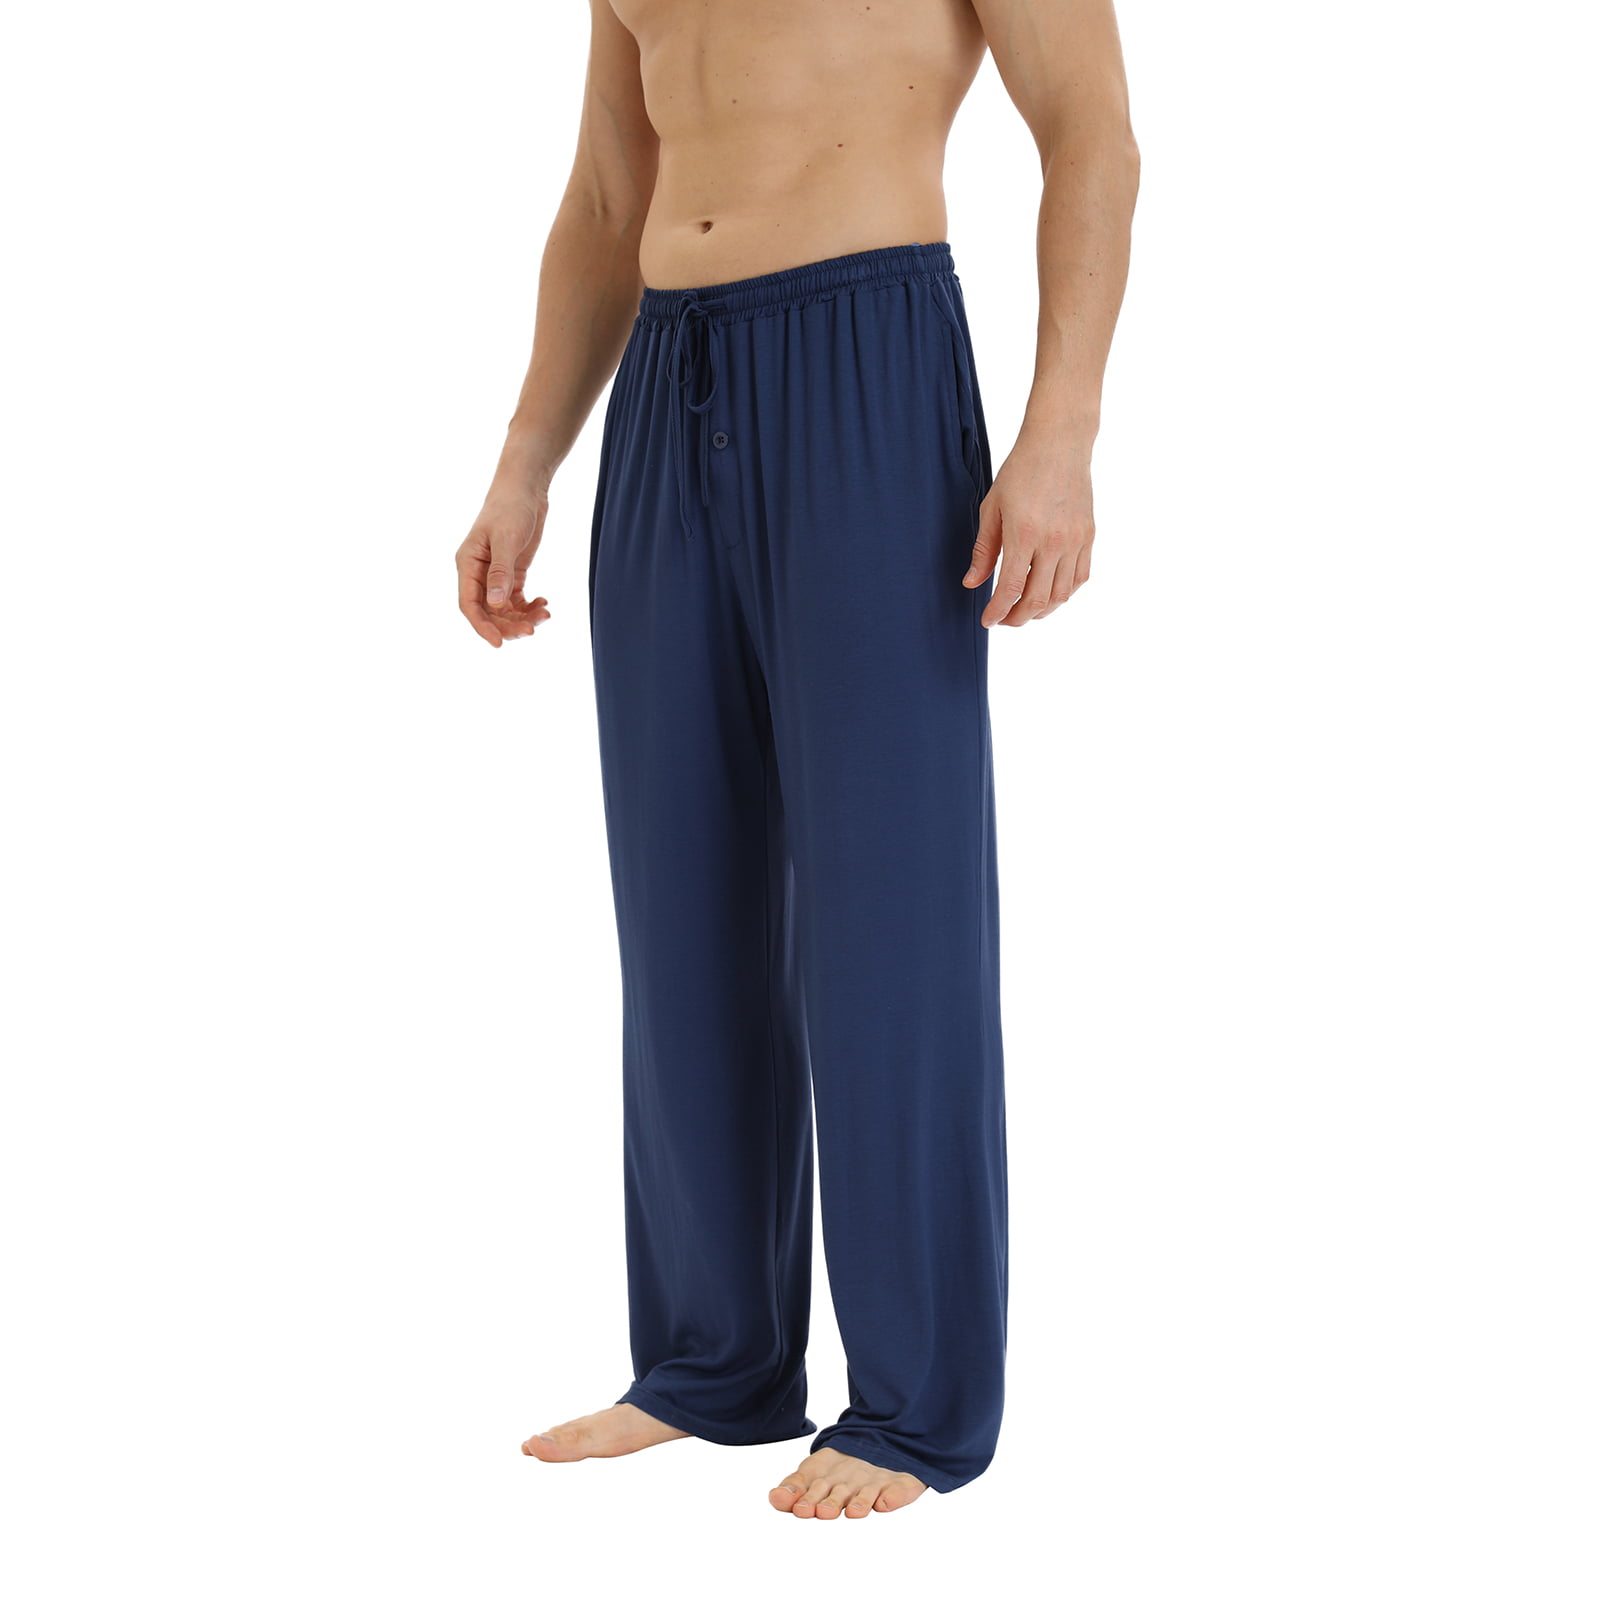 Premium Cotton Flared Sweatpants For Men And Women Straight Casual Lounge  Trousers Style 230712 From Xiao0002, $26.34